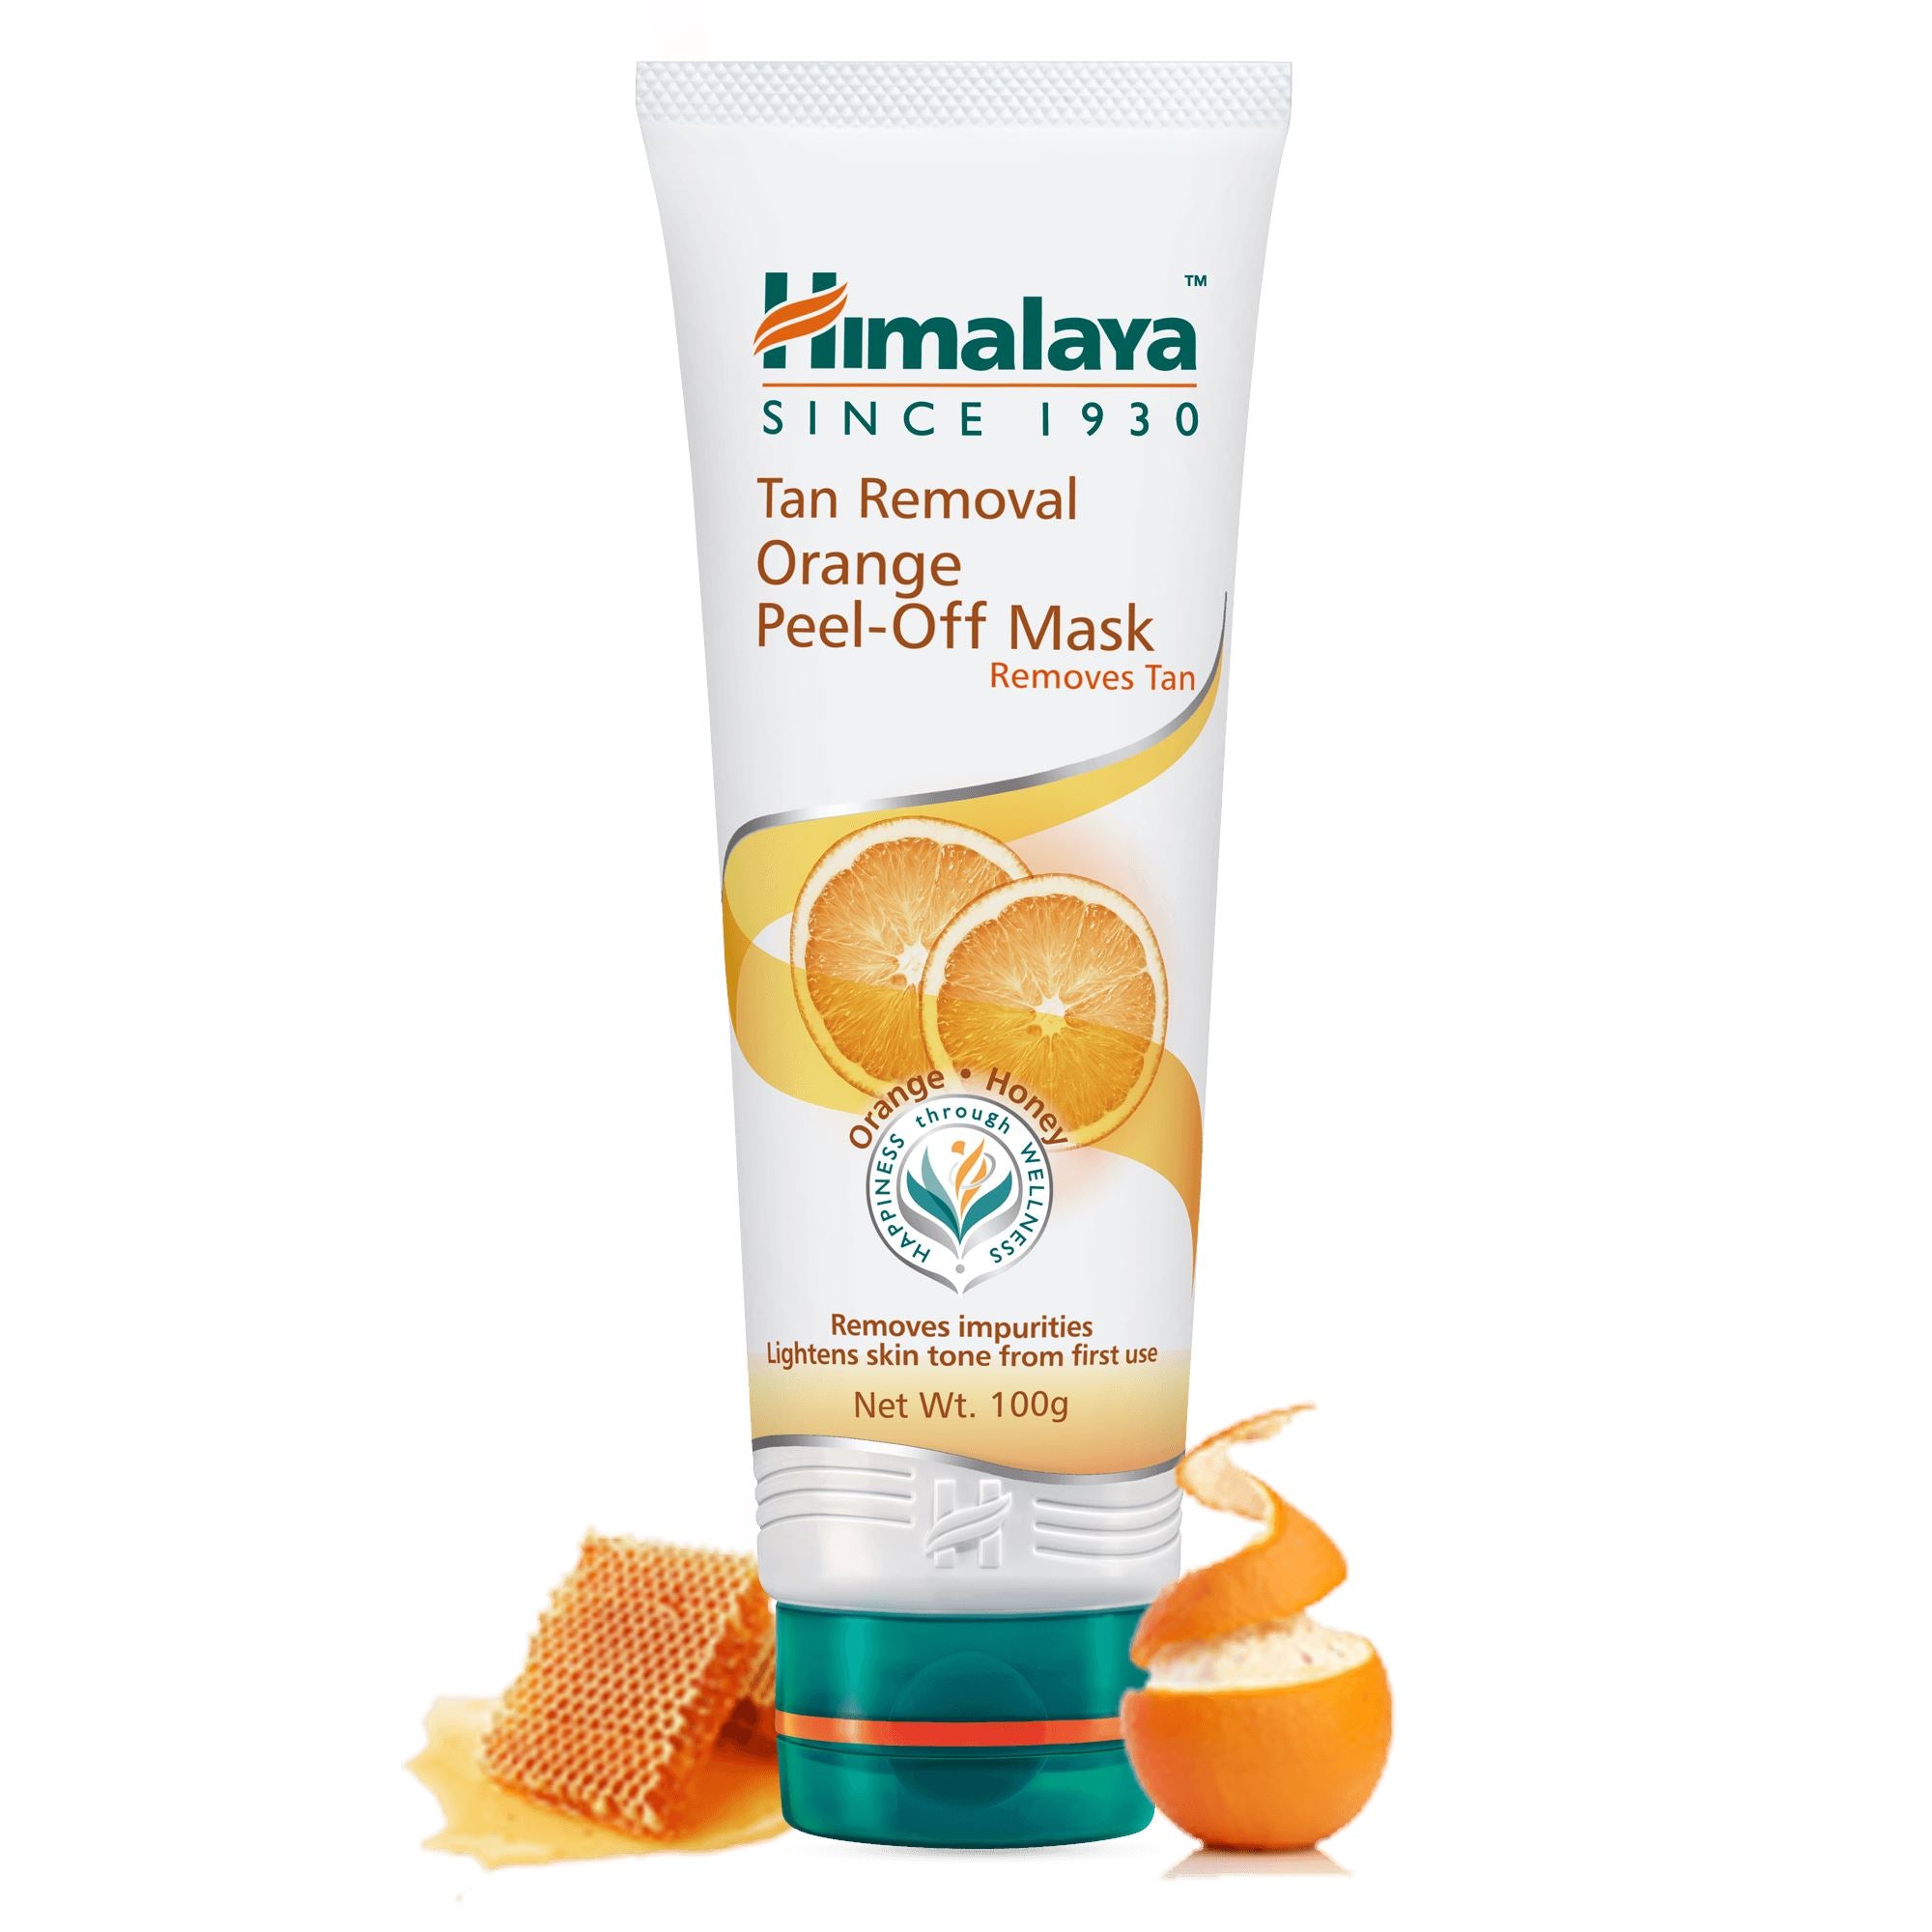 Himalaya Tan Removal Orange Peel-Off Mask - Removes impurities. Lightens skin tone from first use